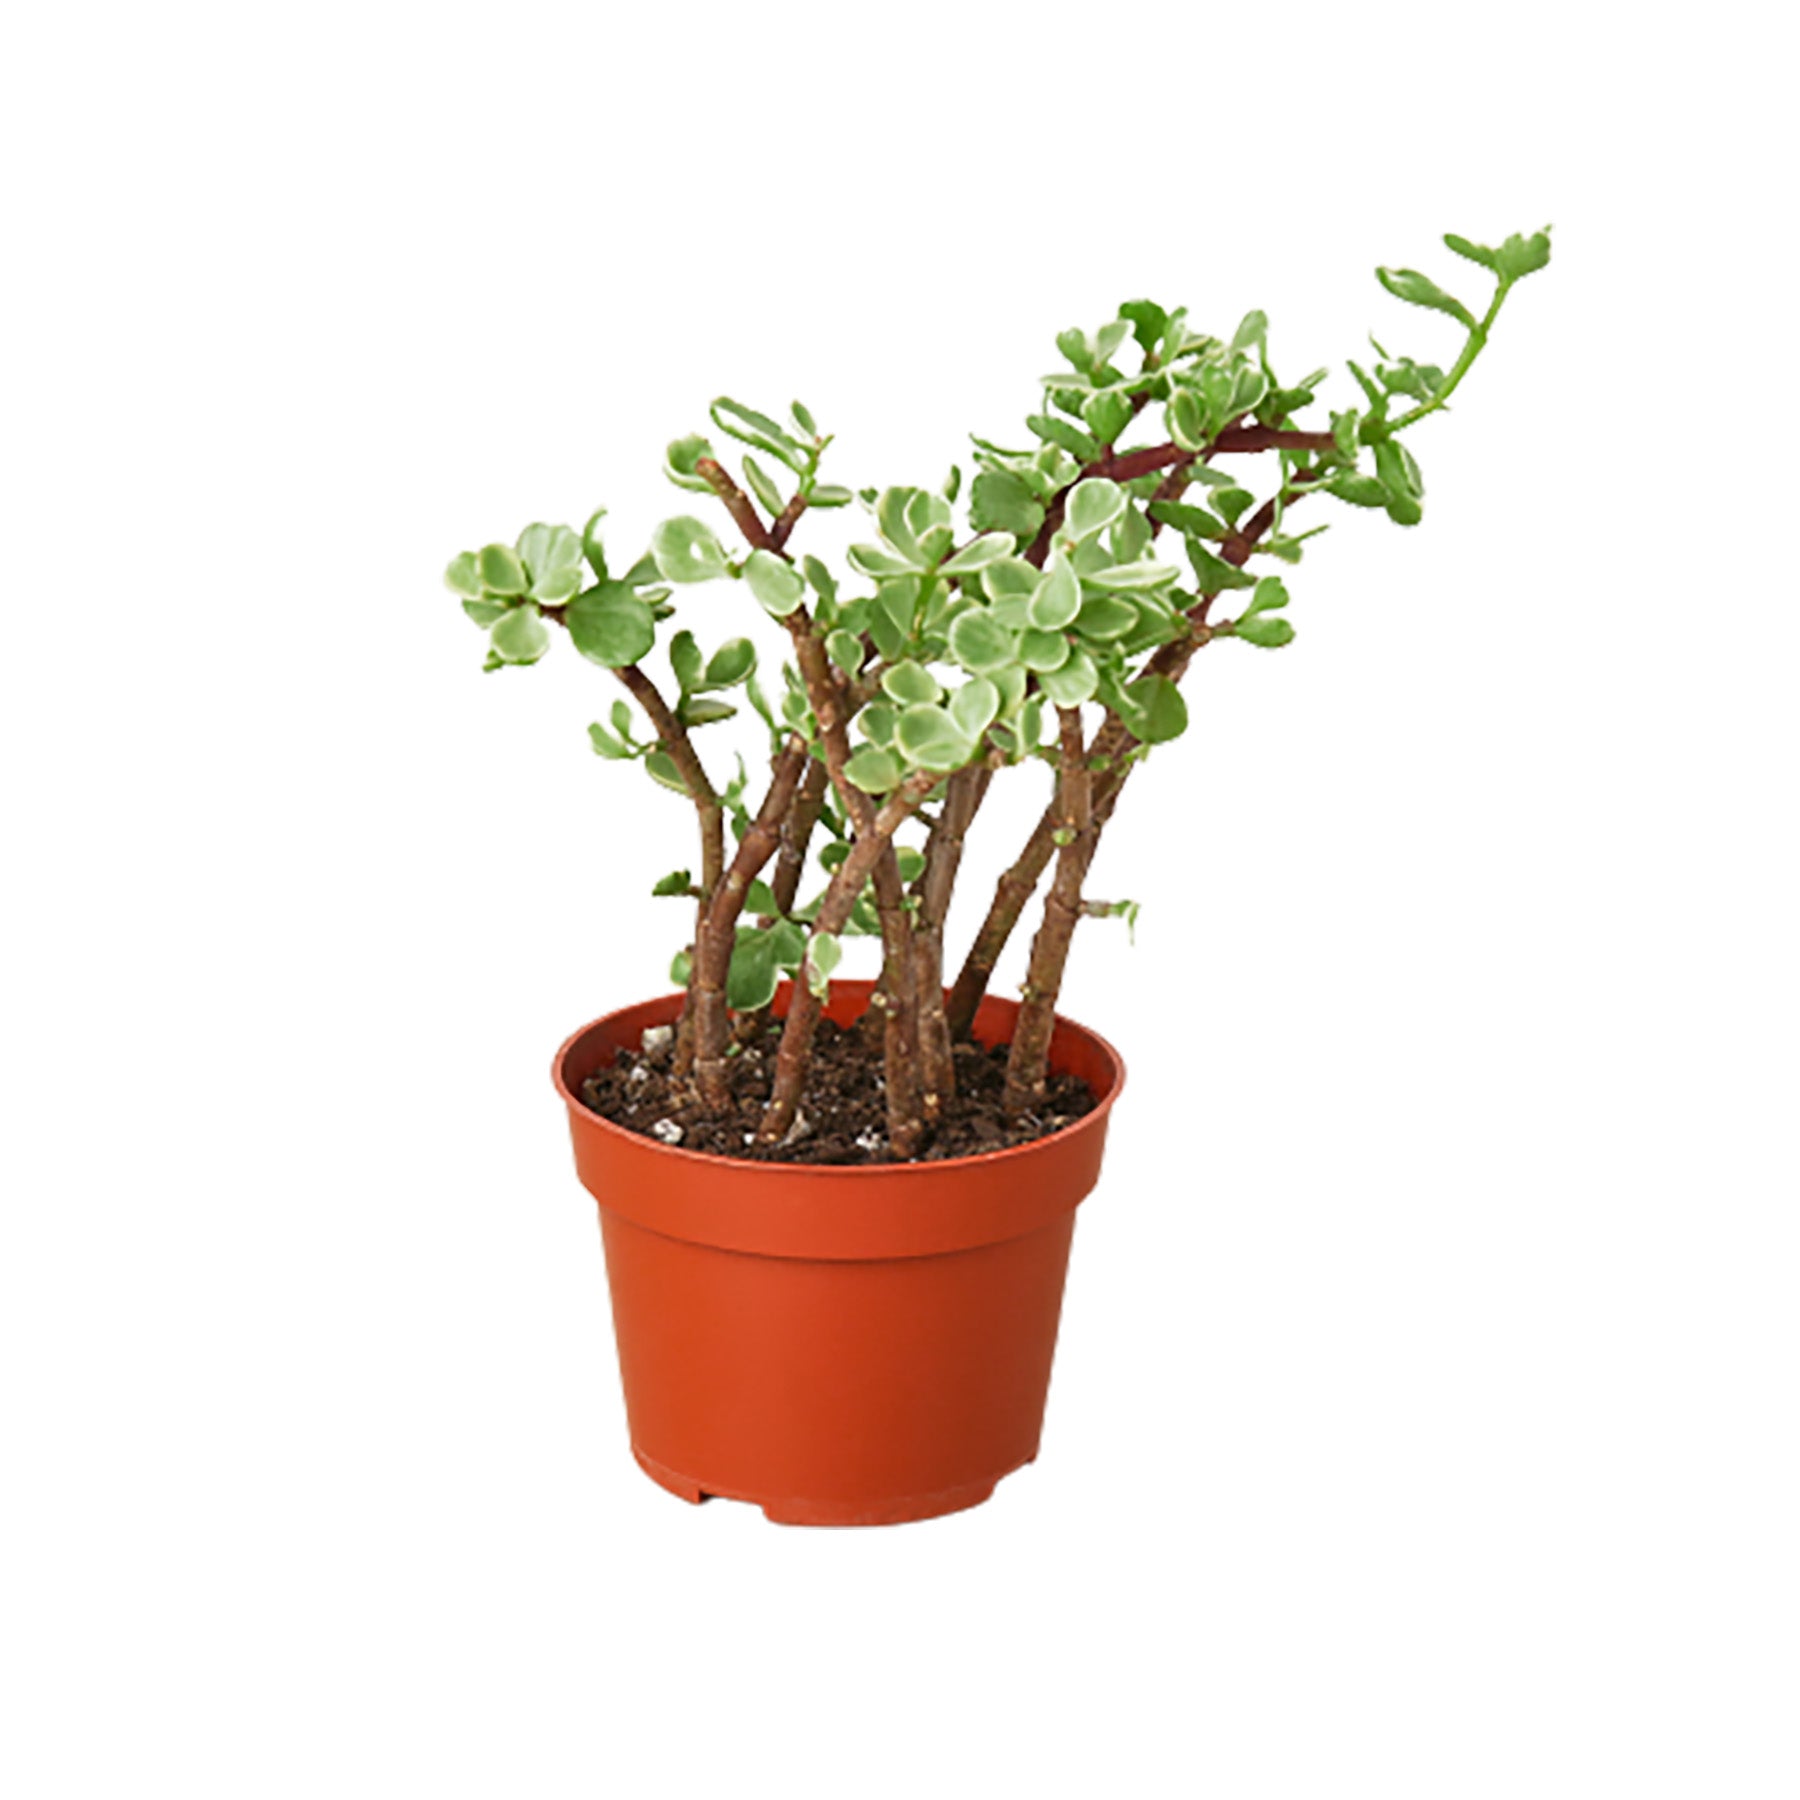 A small plant in a pot on a white background at the best garden nursery near me.